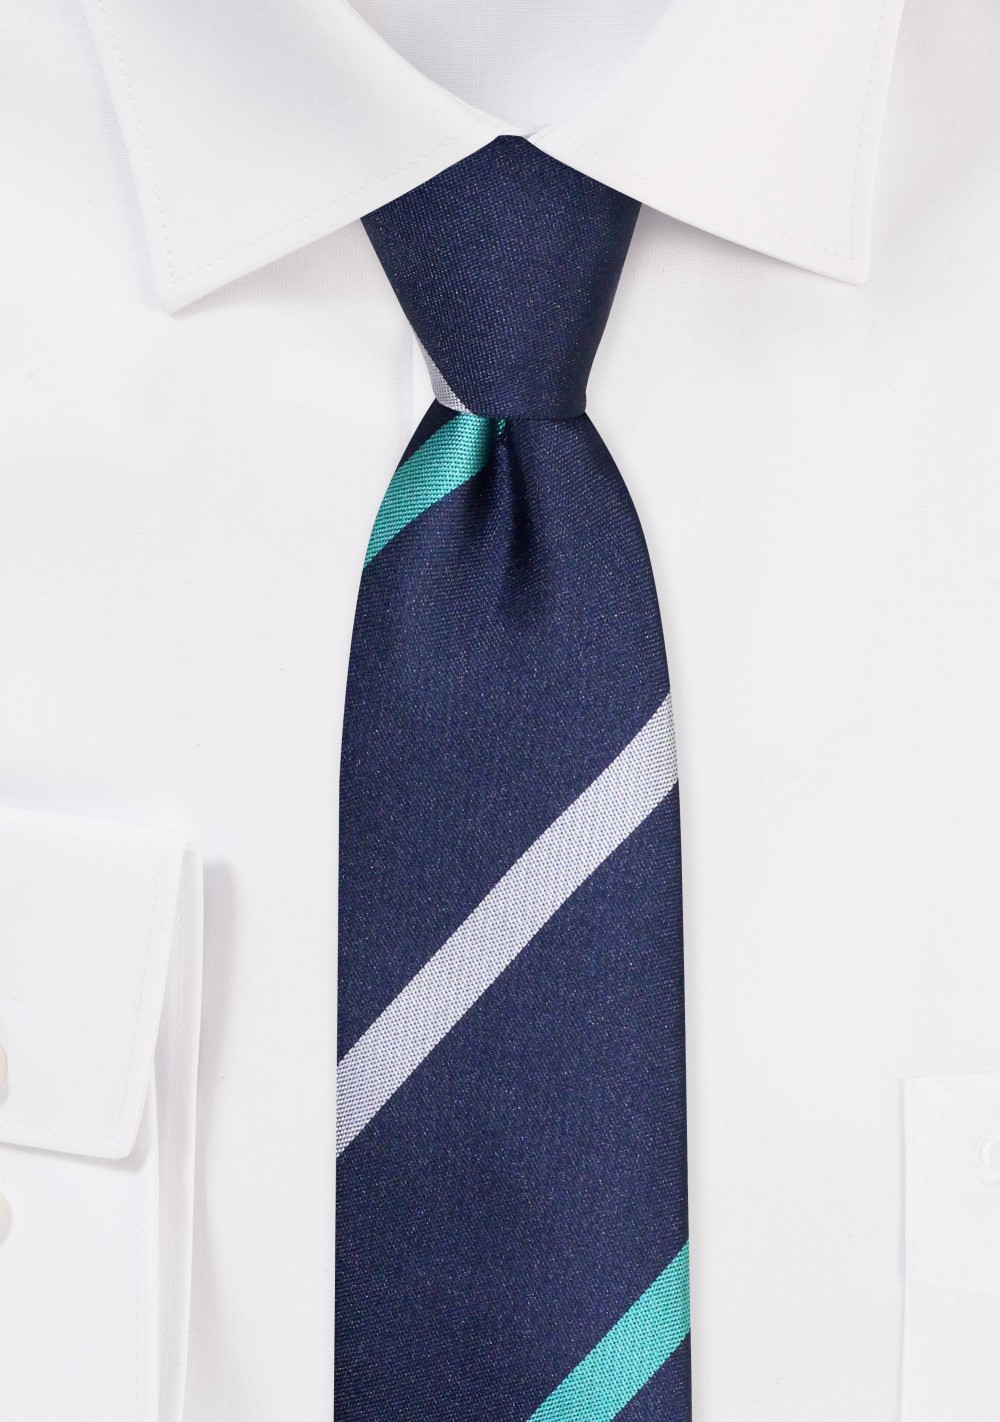 Skinny Tie in Navy with Stripes in Teal Green and Gray